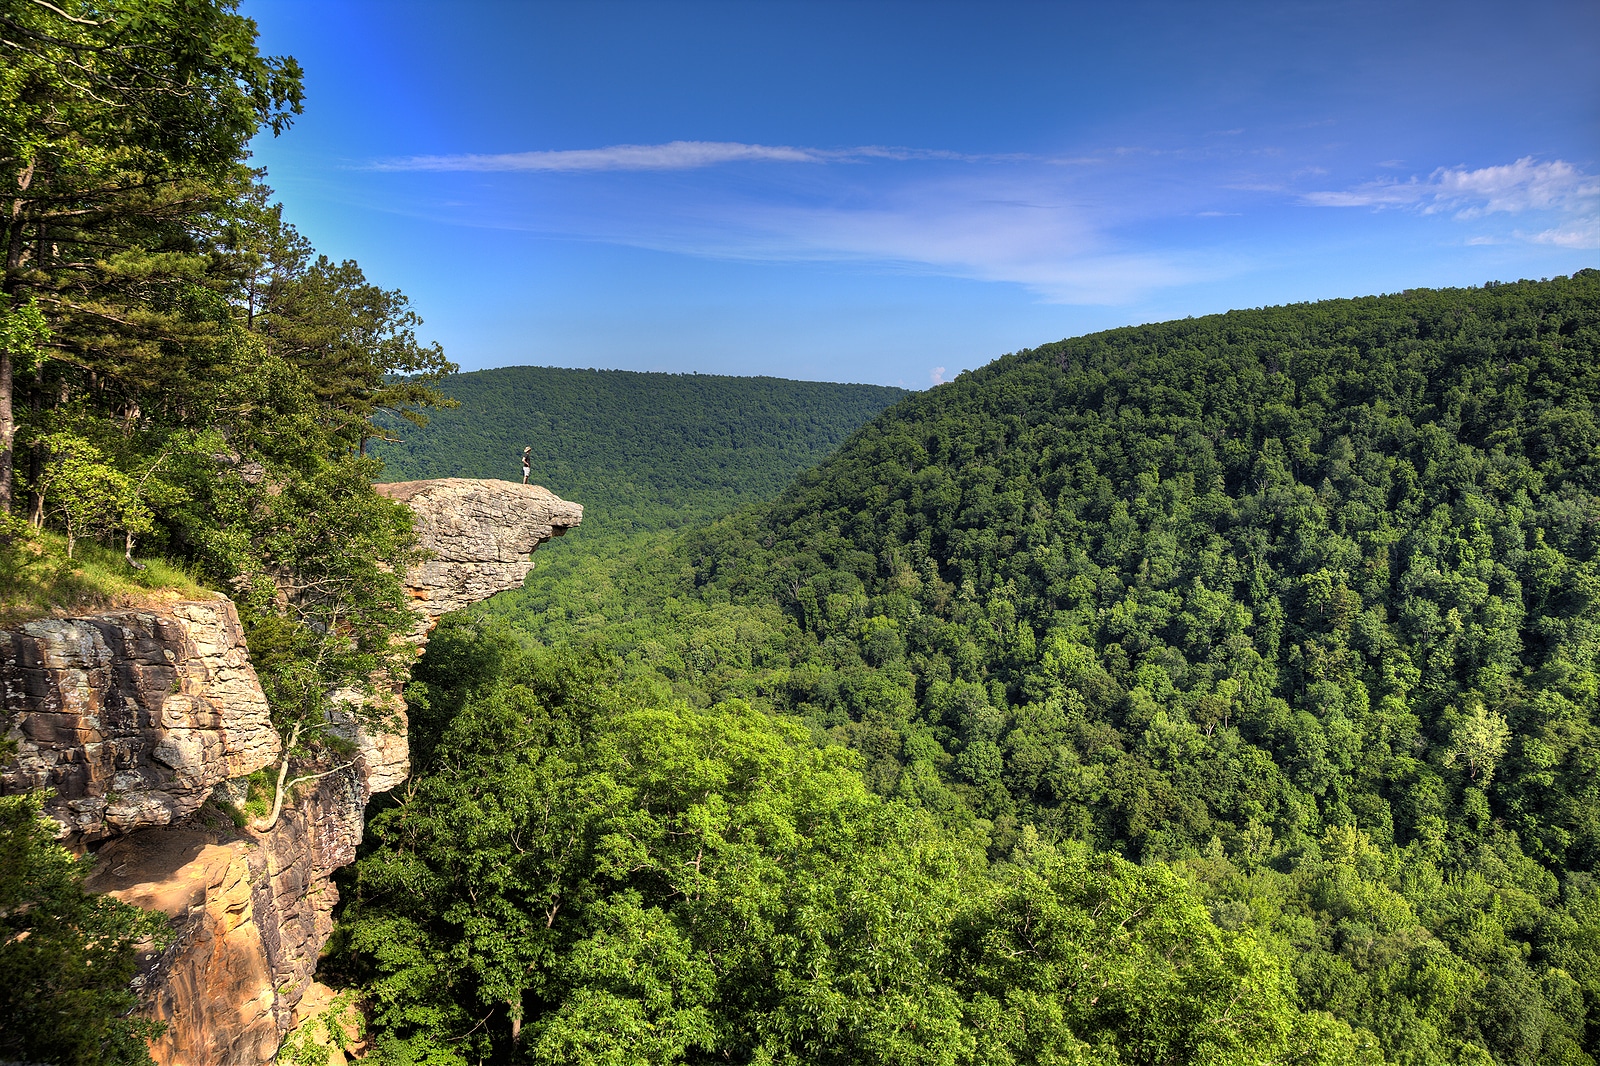 This famous place on the Whitaker's Point trail is the number 1 most photographed spot in Arkansas. A male hiker enjoys the view standing hundreds of feet above the Ozark mountains forest below.